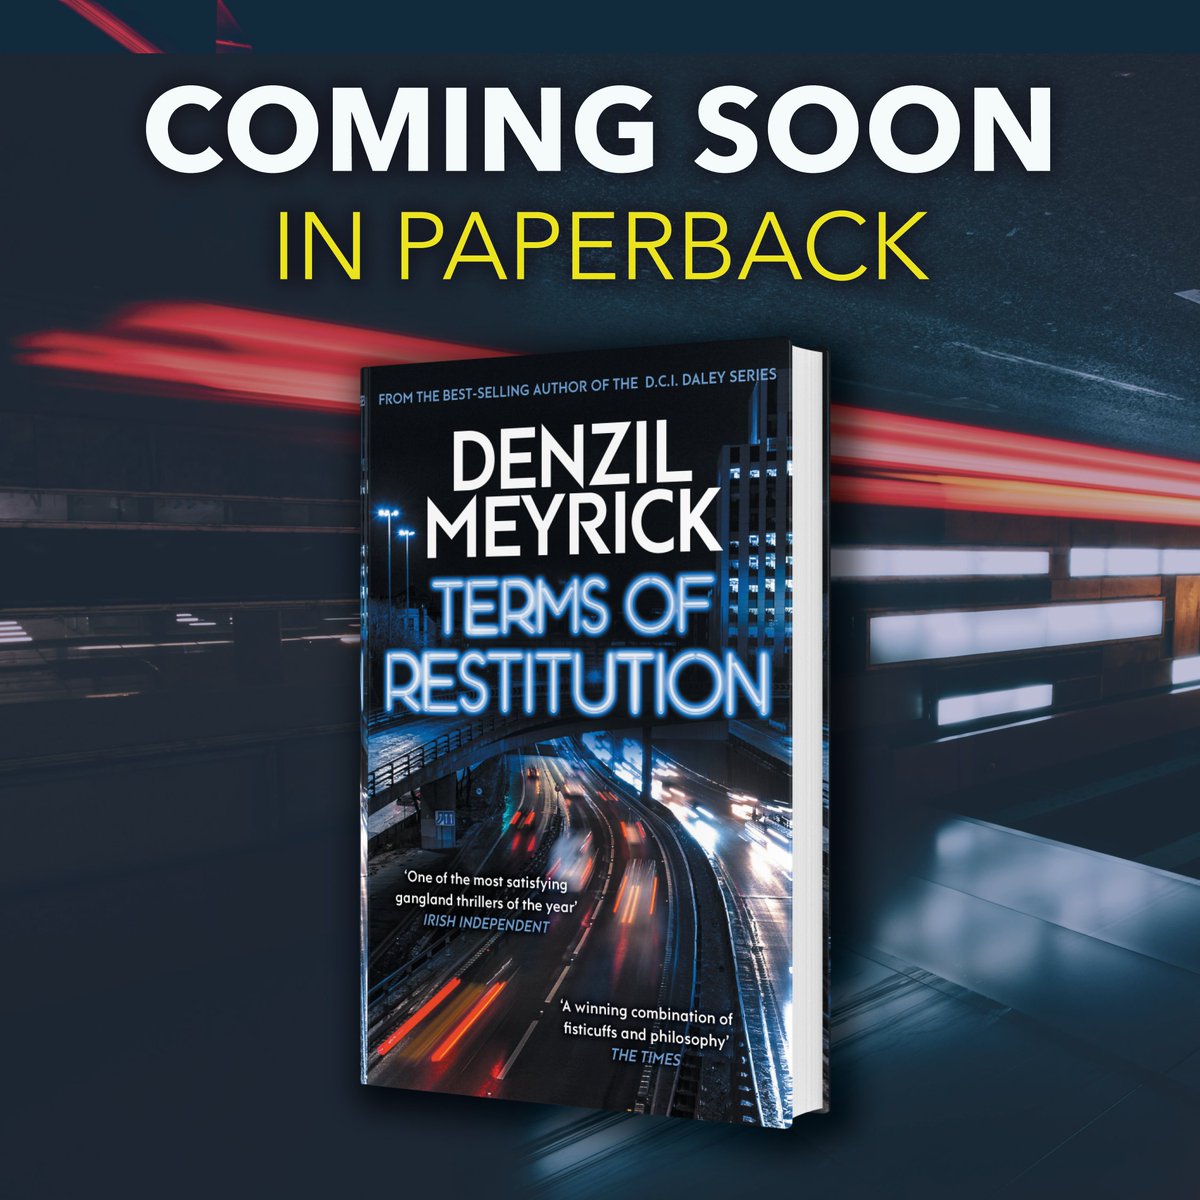 It's a COVER REVEAL and COMPETITION! The brand new cover for paperback edition of #TermsOfRestitution ! Simply RETWEET and SHARE to go into the hat to WIN one of 3 SIGNED COPIES.  #giveway #tuesdayvibe #tuesdaymotivations #books  📚📖🔖 (Ends midnight 2 March, UK time). 👍🍾🌟 